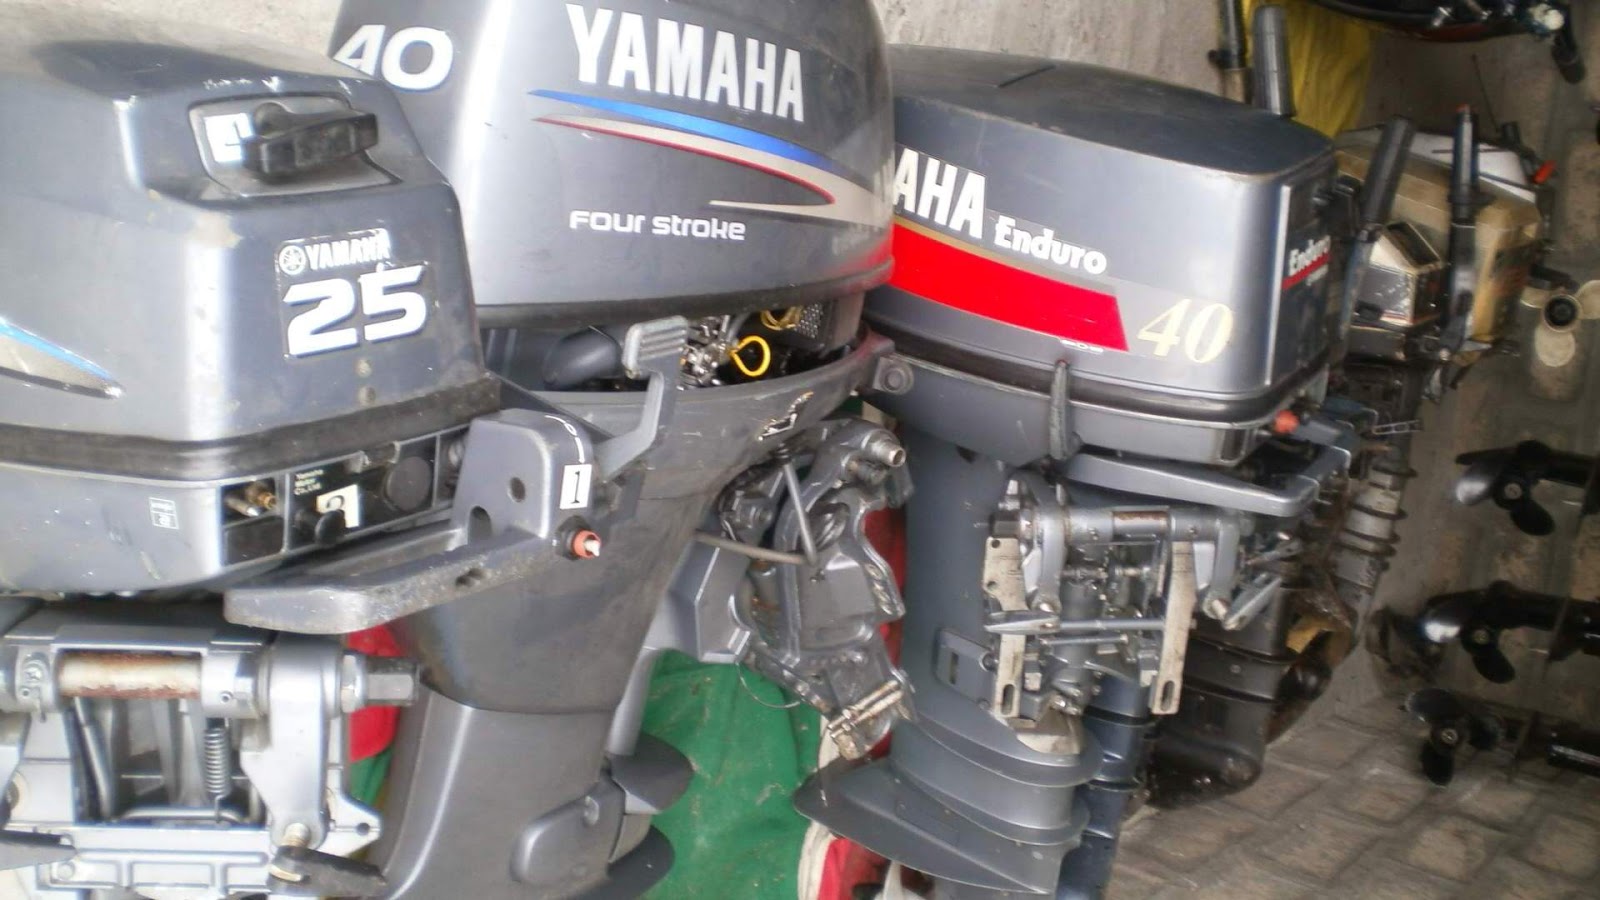 Who sells used outboard boat engines?